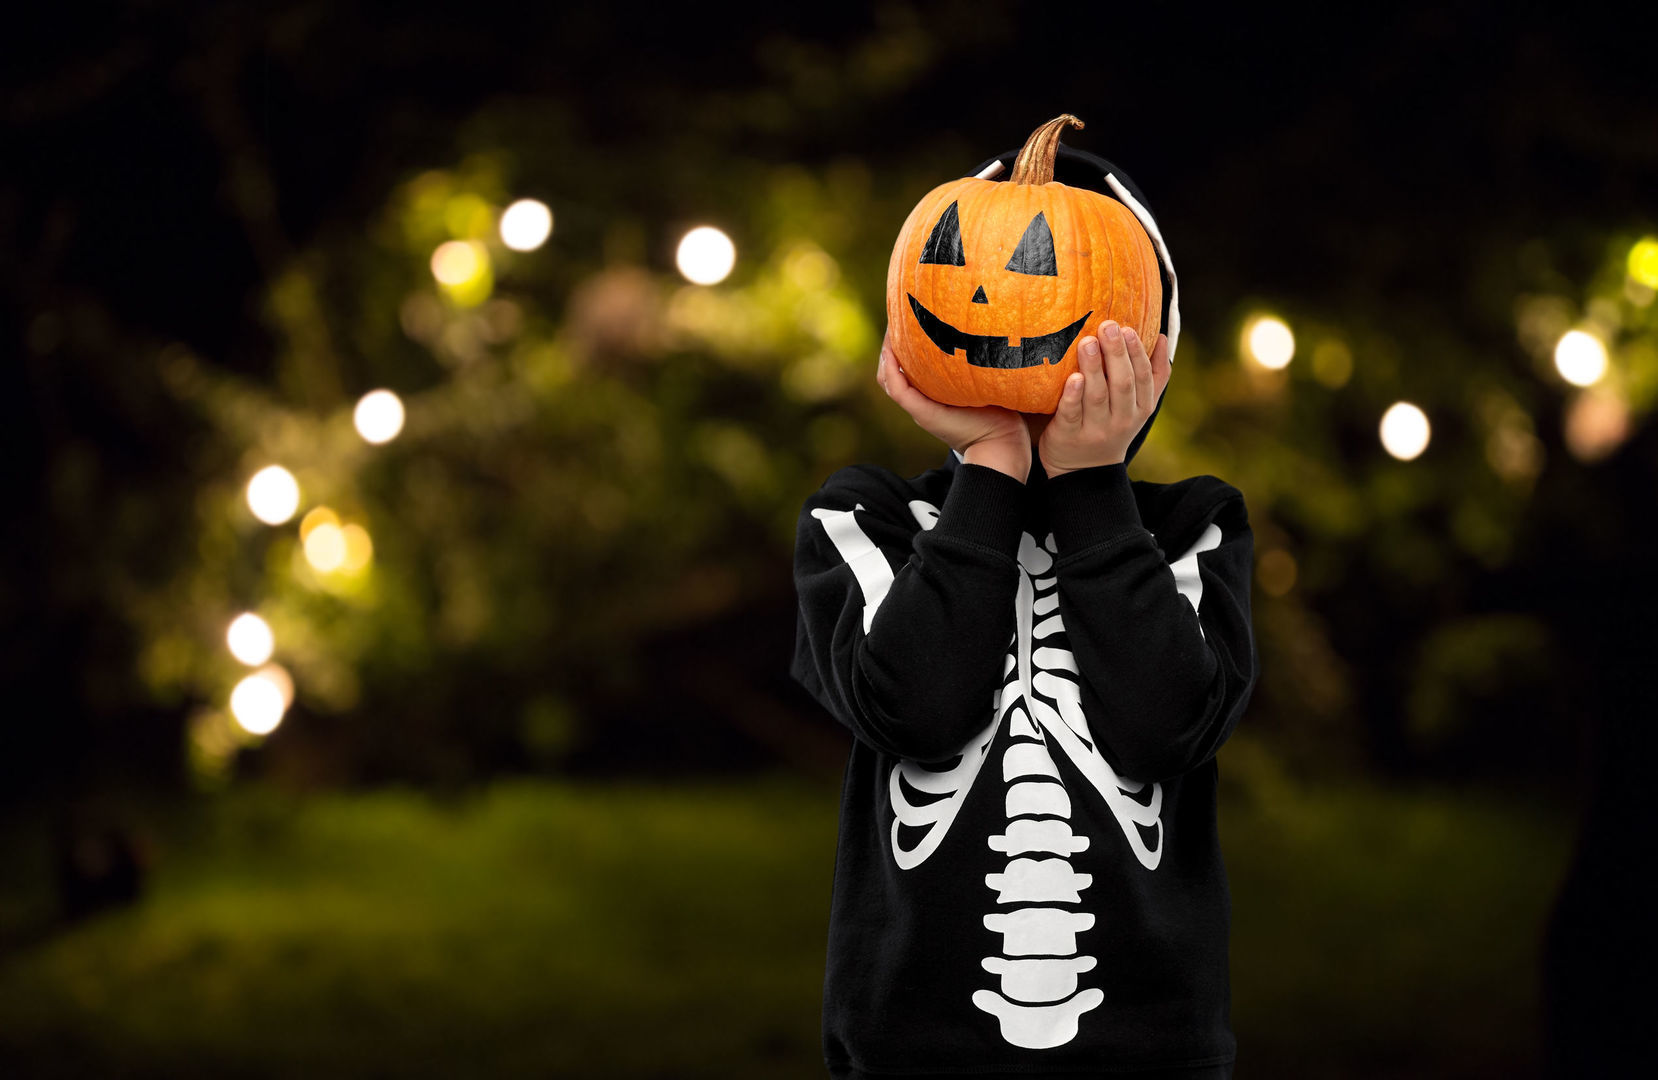 A brand new spooky Halloween trail for all the family at Blenheim Palace, Woodstock, Oxfordshire, United Kingdom